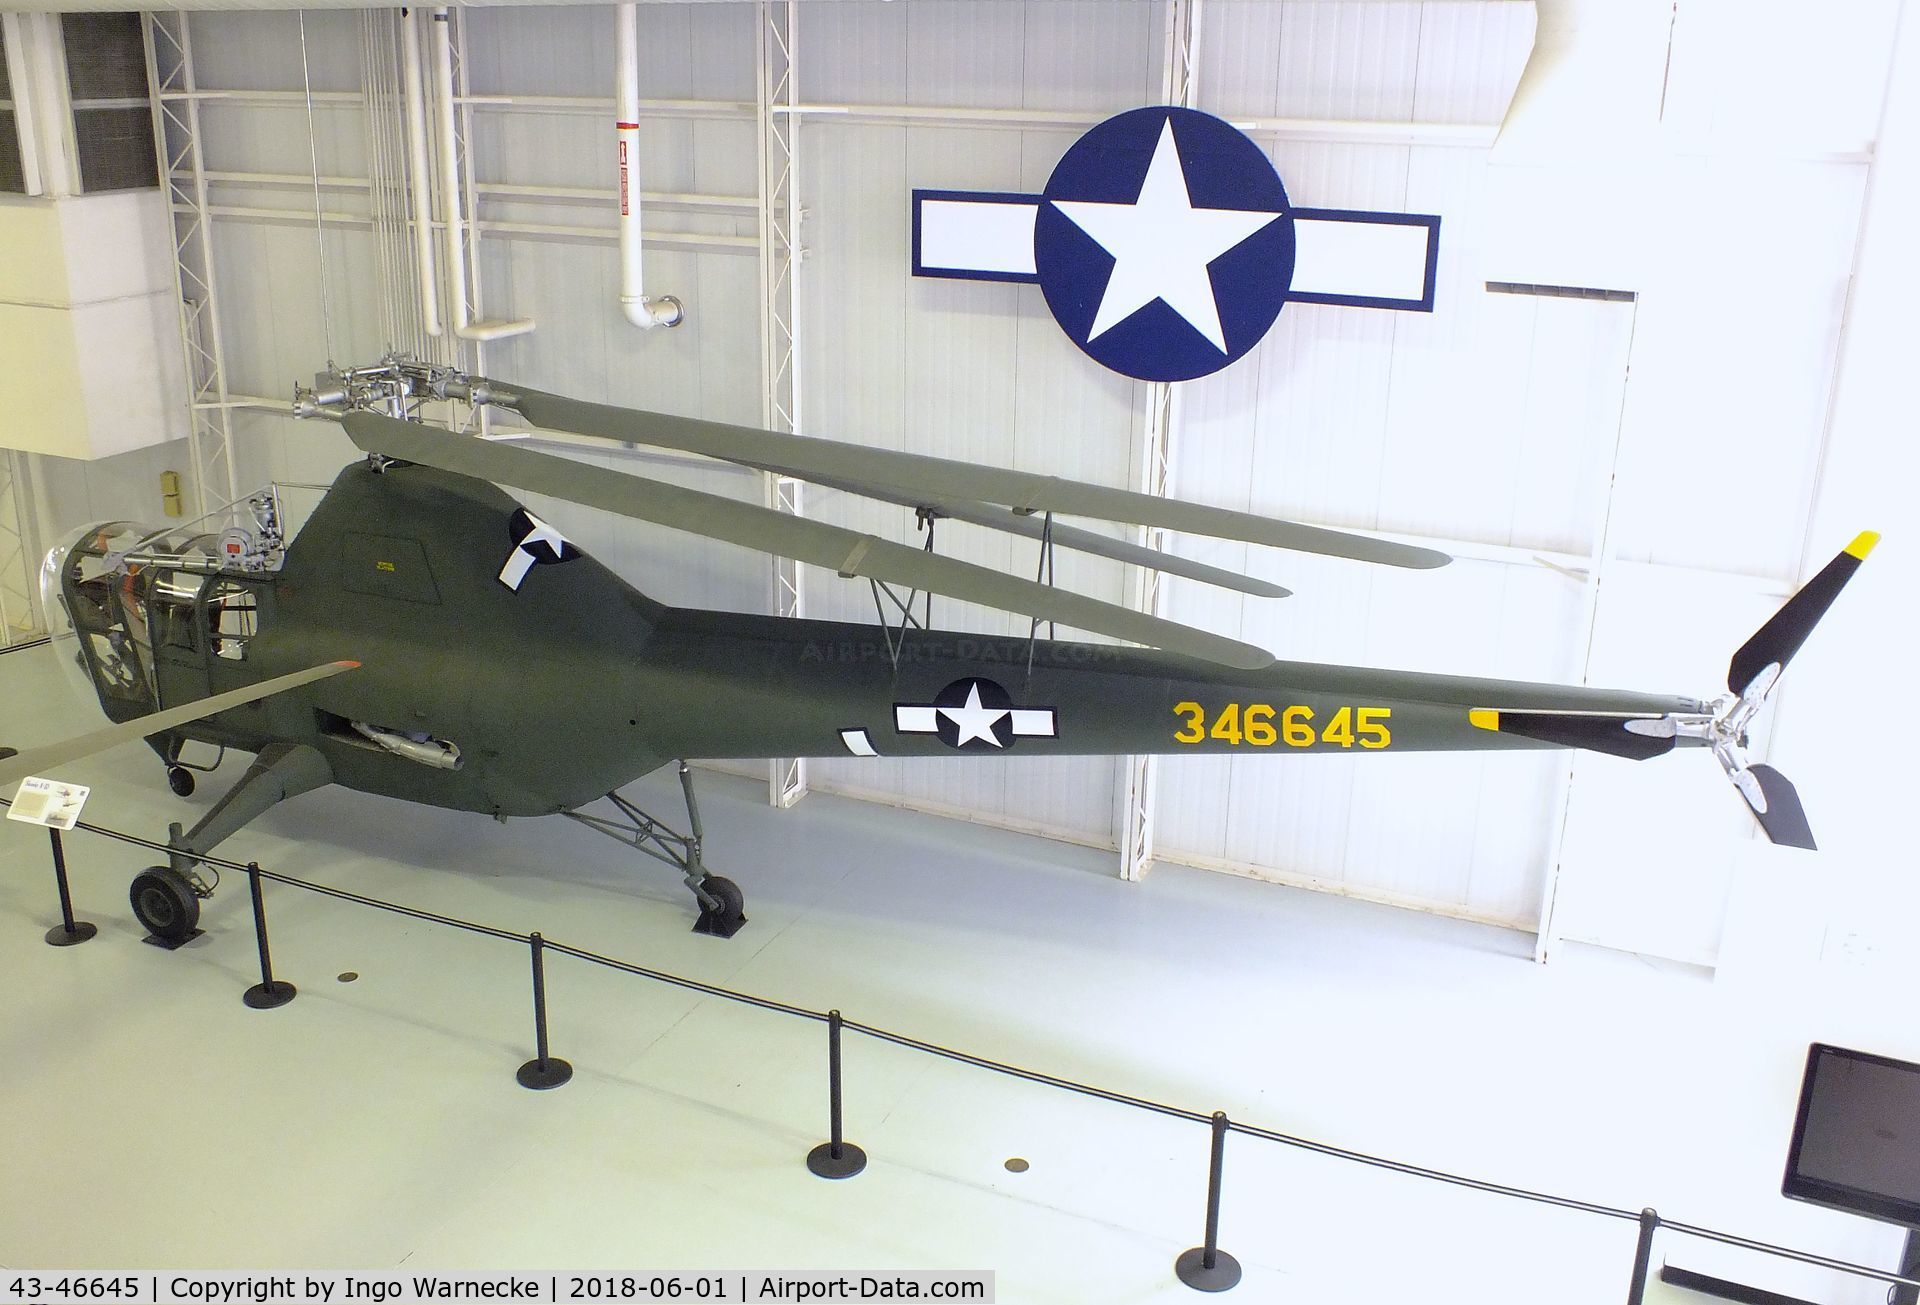 43-46645, 1944 Sikorsky R-5D Dragonfly C/N 188, Sikorsky R-5D Dragonfly at the US Army Aviation Museum, Ft. Rucker